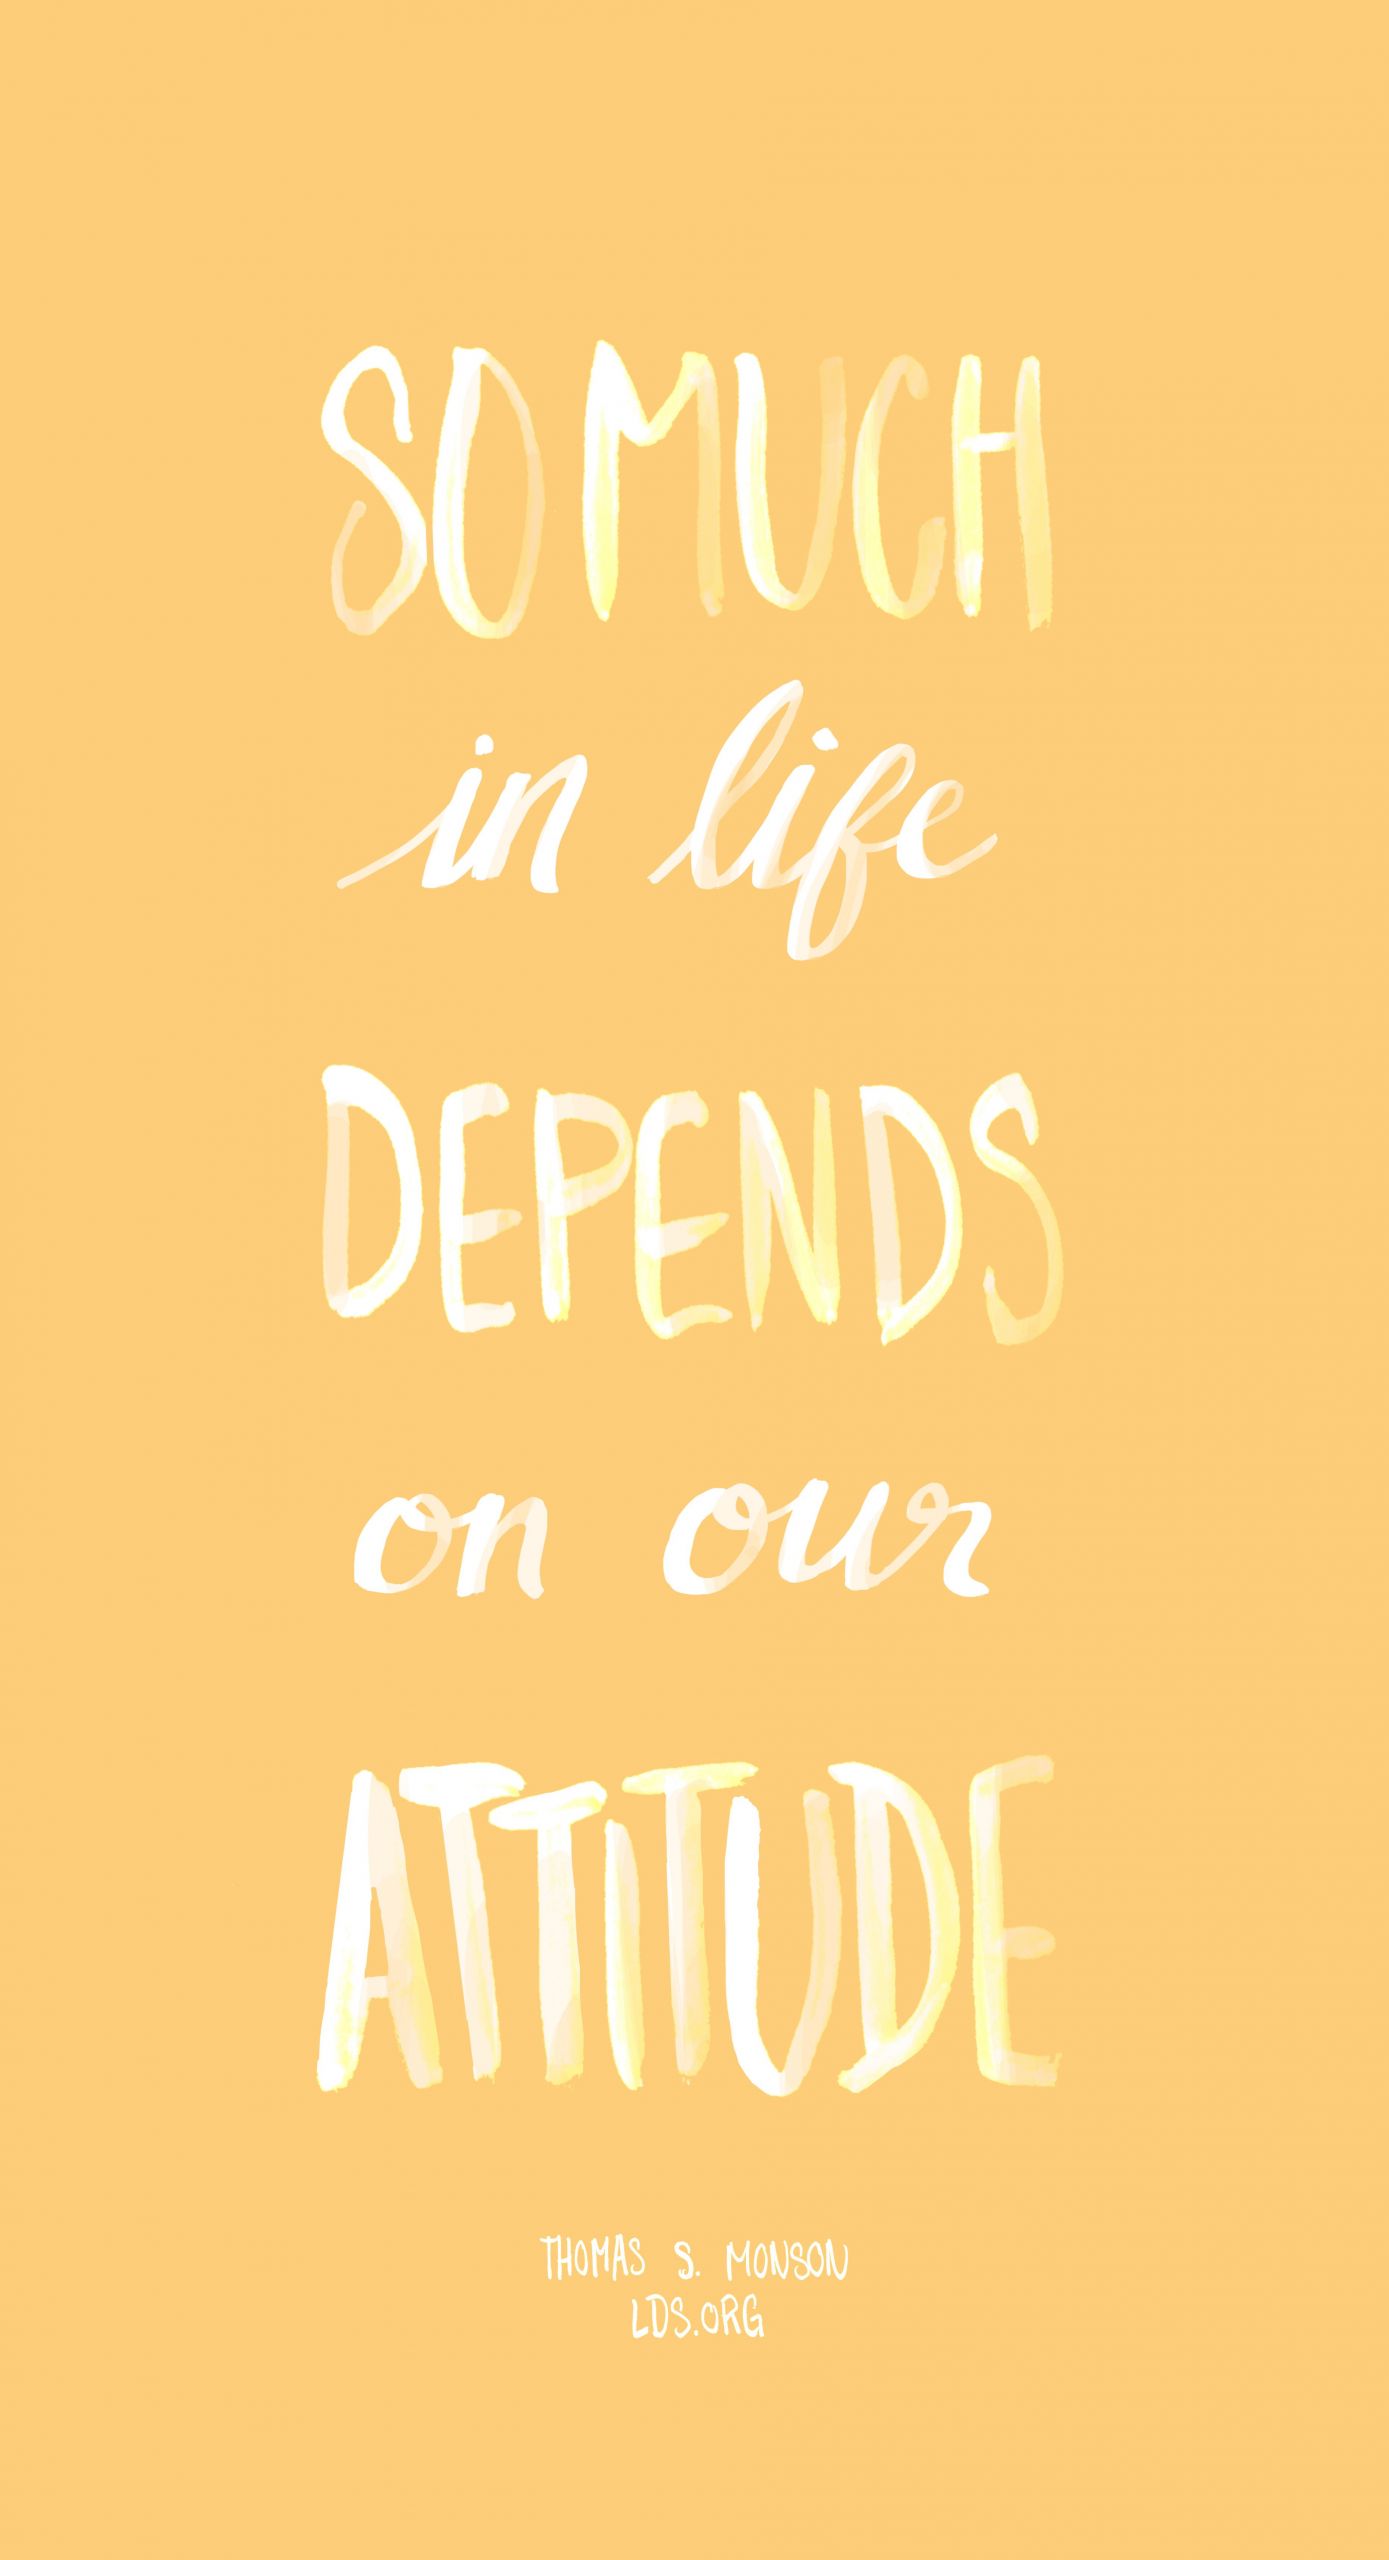 Inspirational Lds Quotes
 So much in life depends on our attitude —Thomas S Monson